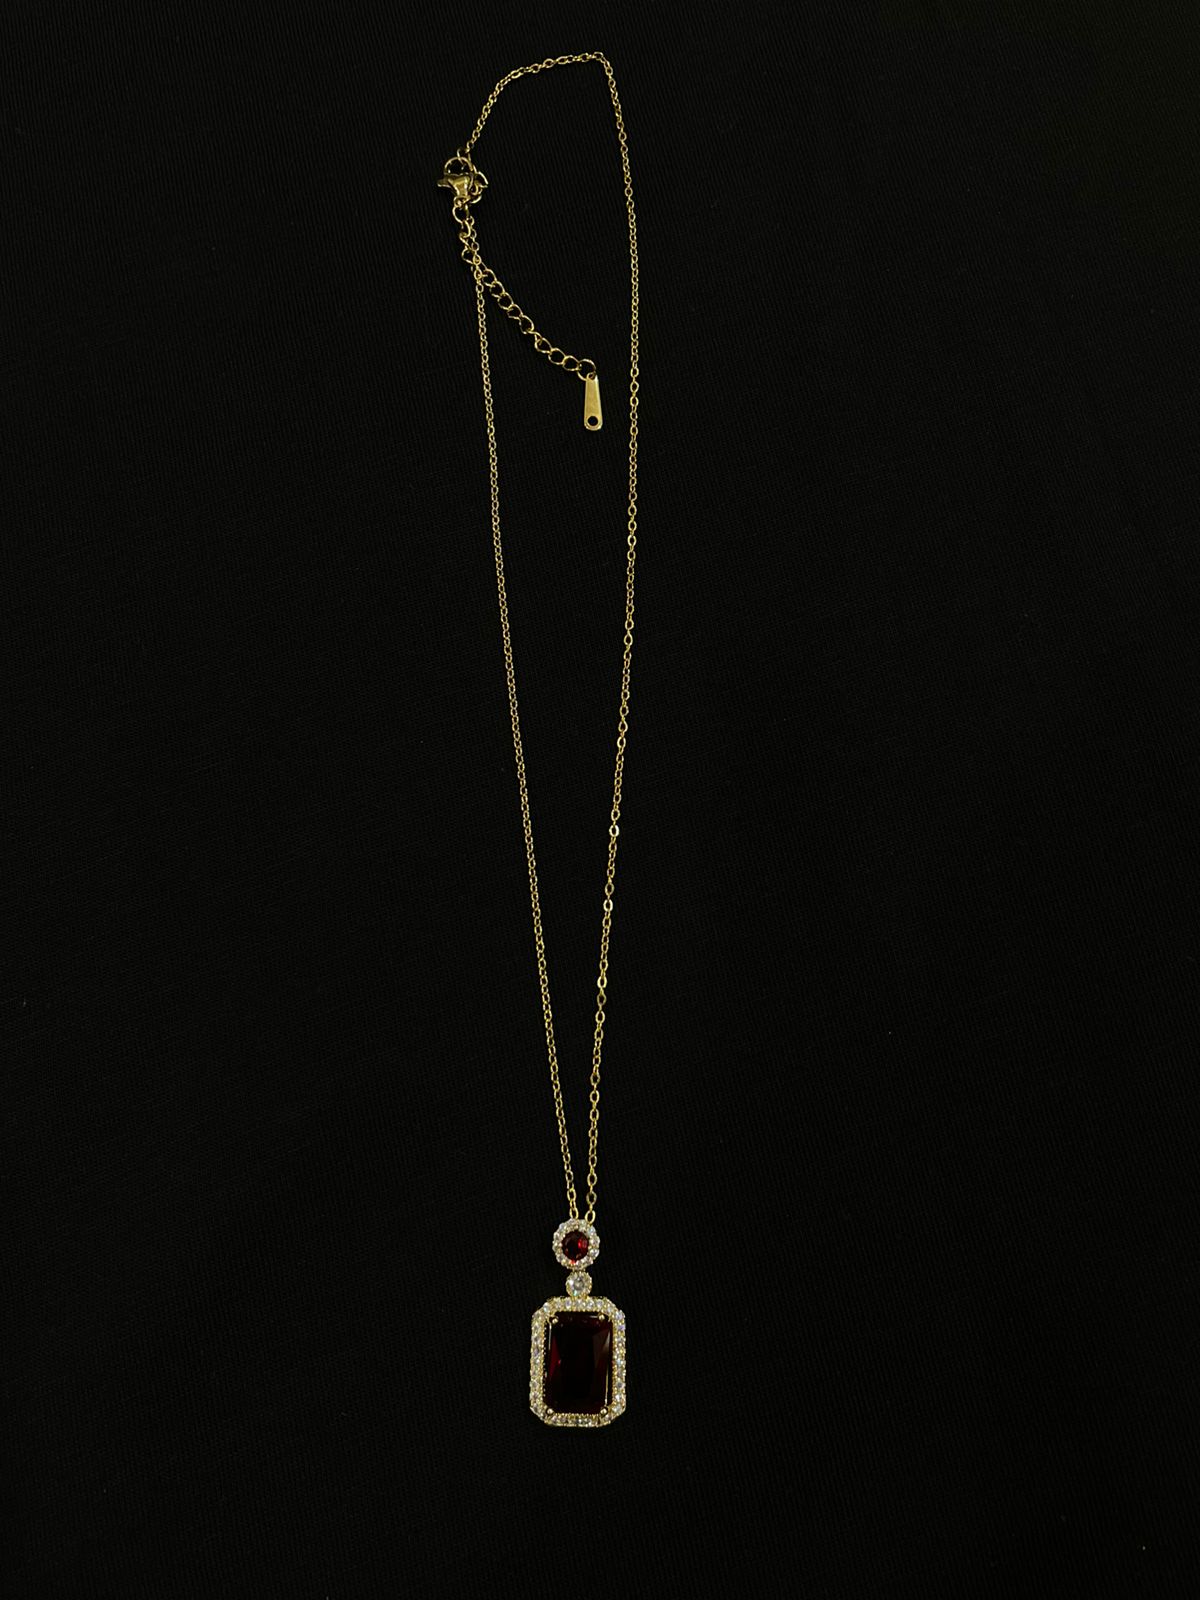 SCARLET RUBY GOLD STONE NECKLACE